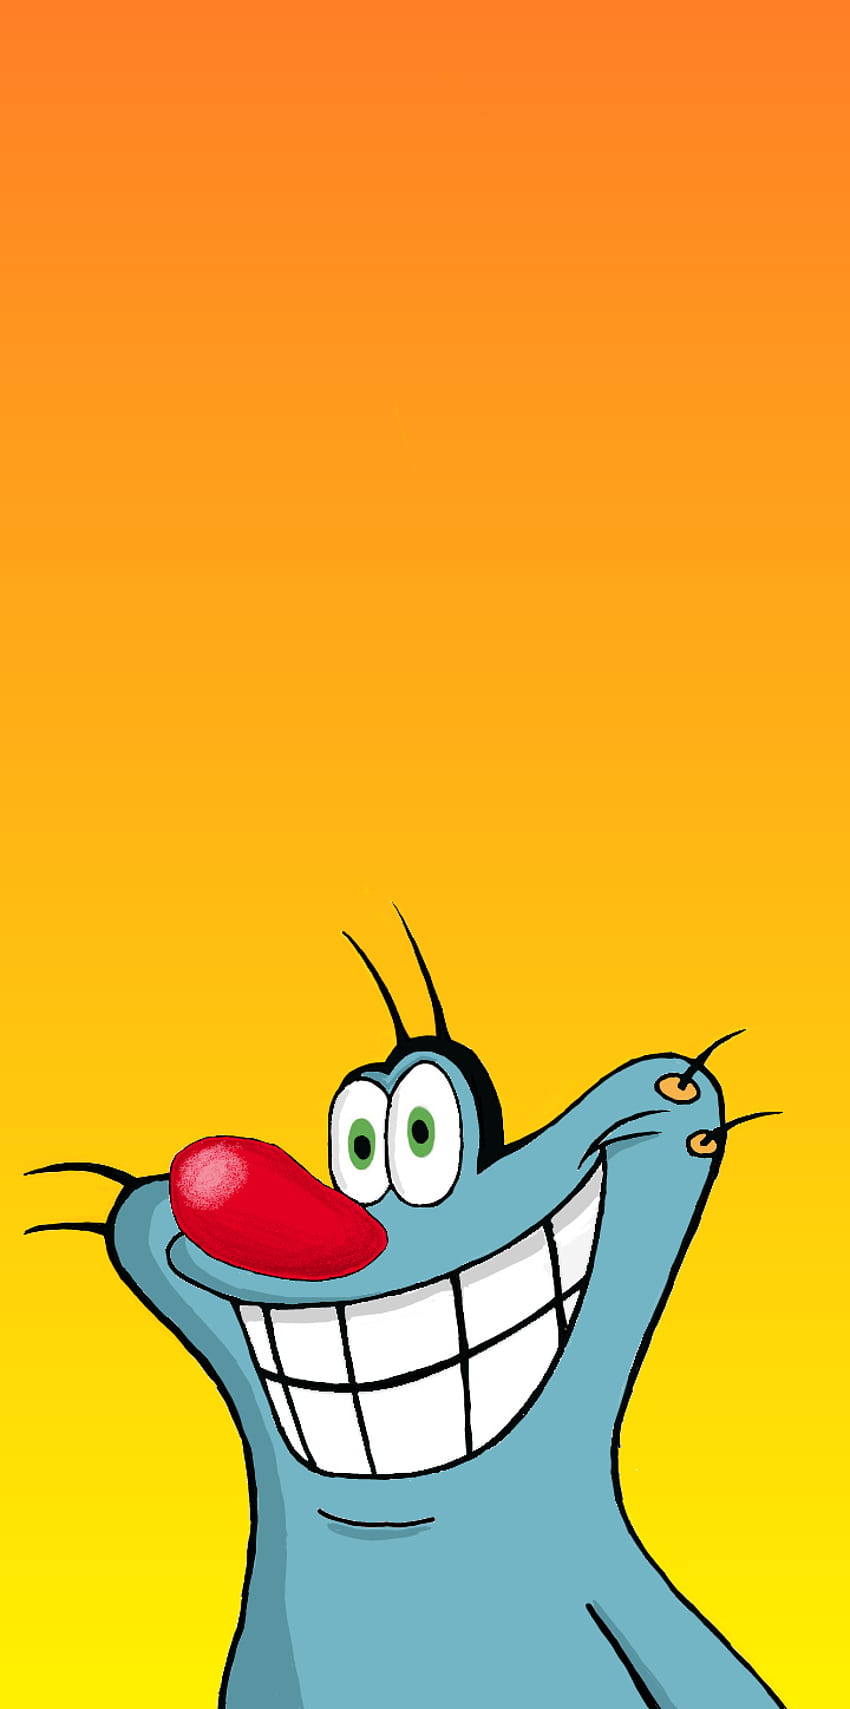 Download Oggy And The Cockroaches Screwdriver Wallpaper | Wallpapers.com